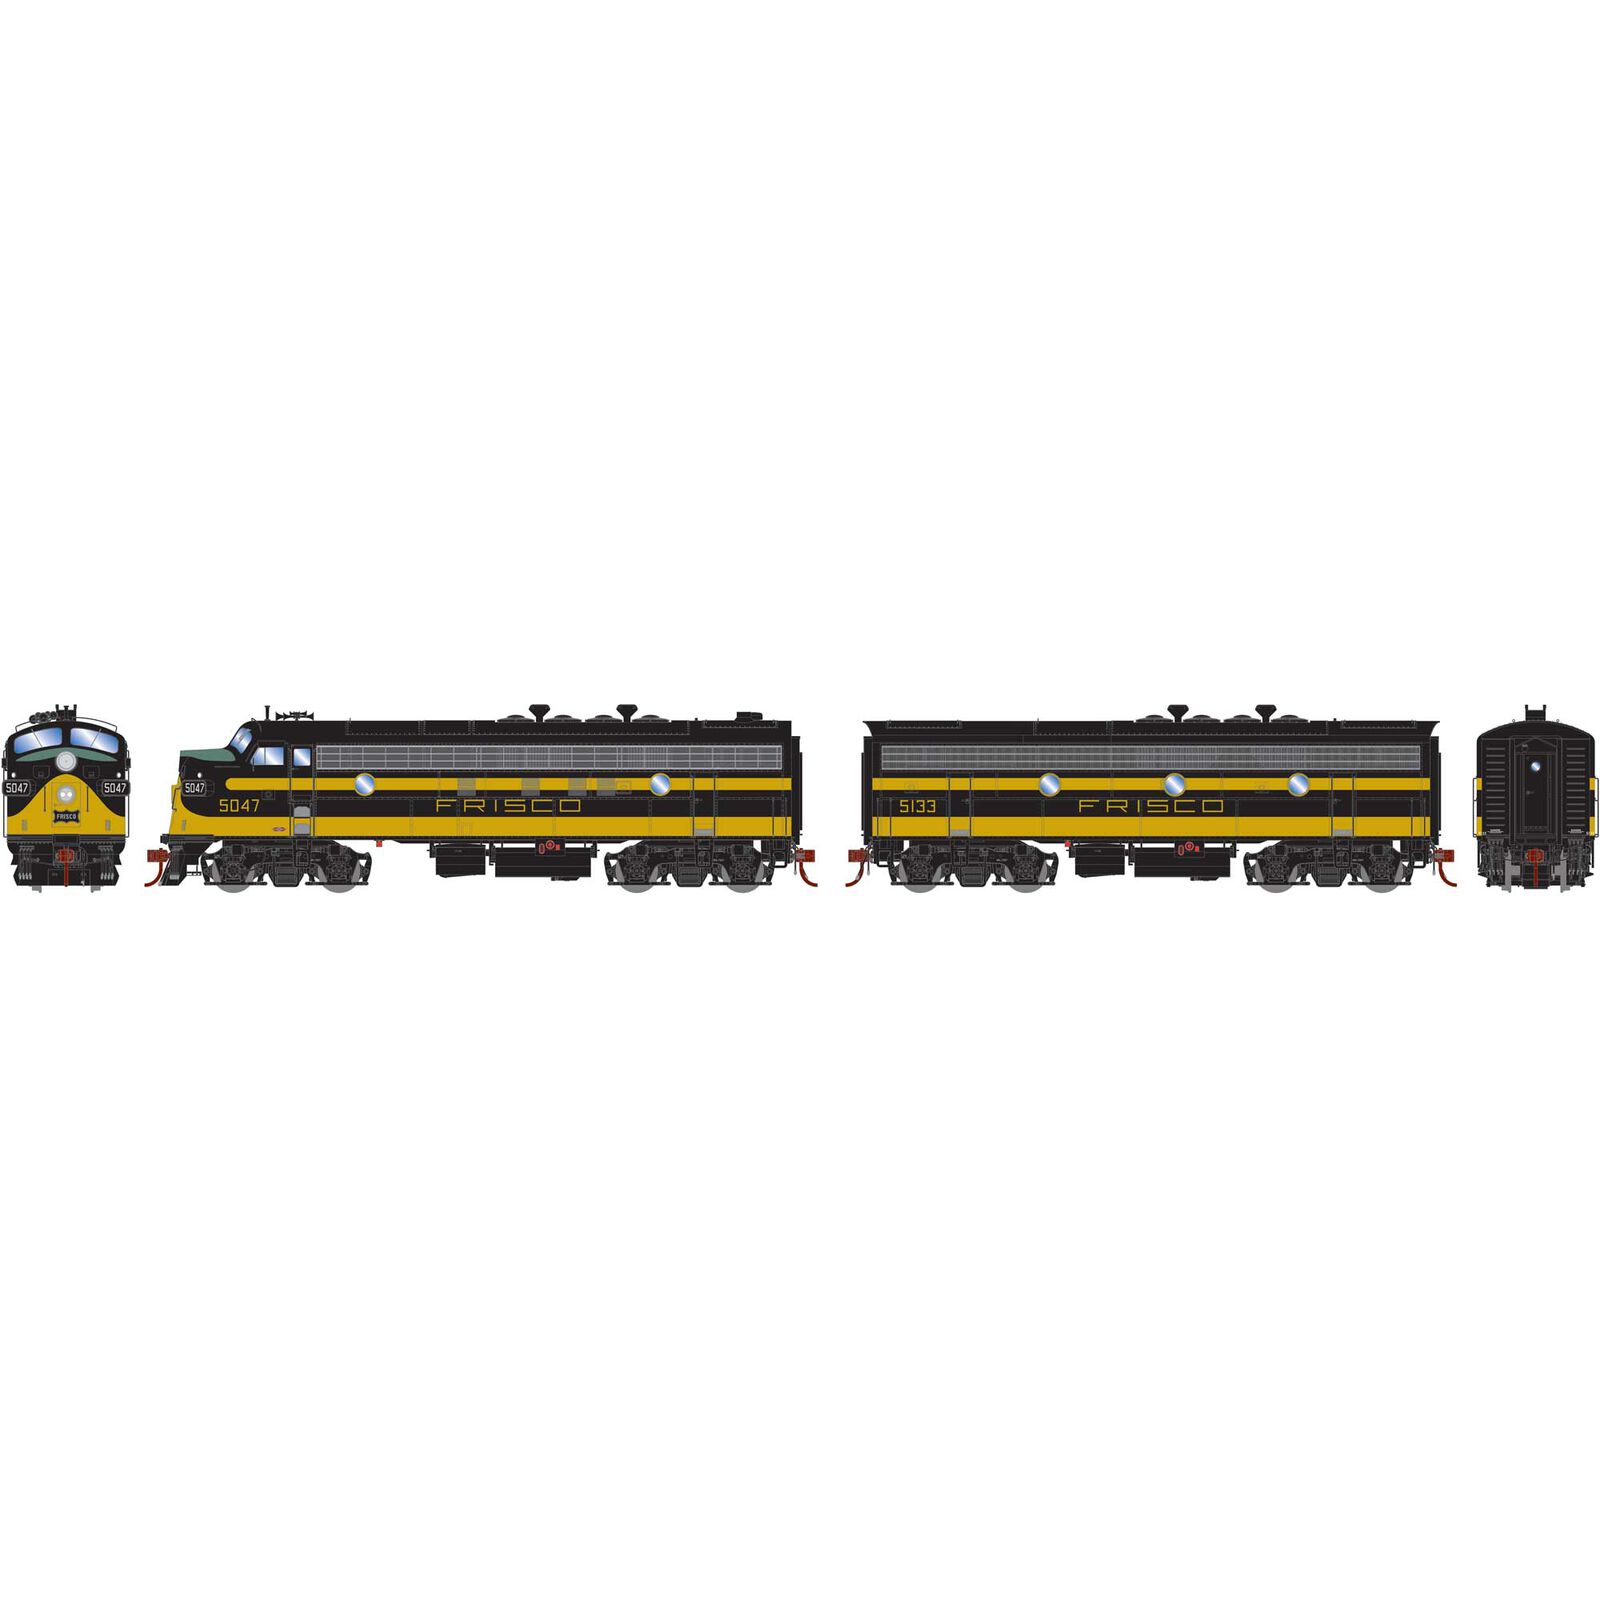 HO FP7A F9B with DCC & SND SLSF Blk & Yel #5047 #5133